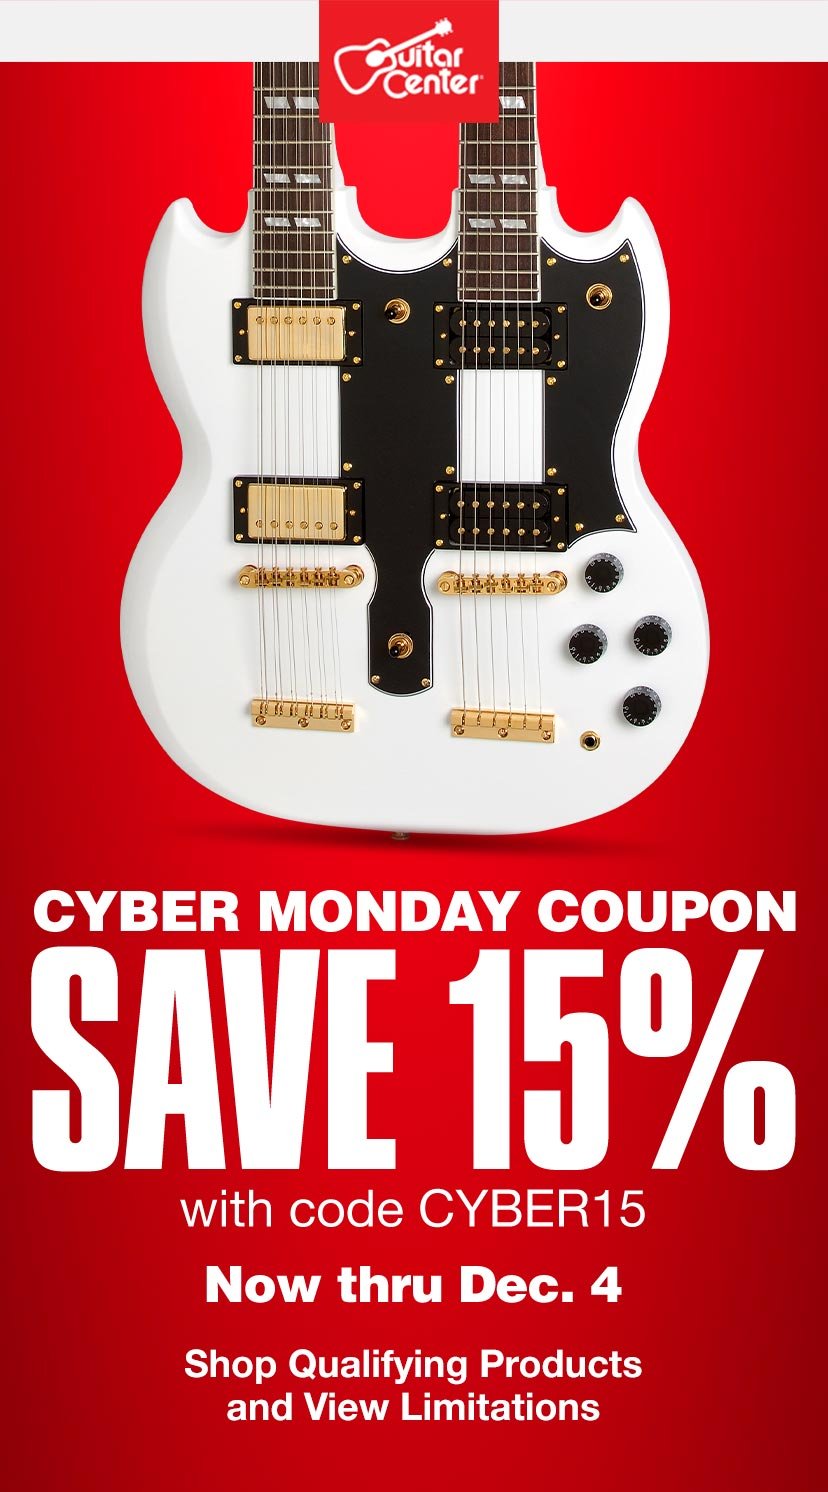 Guitar Center Cyber Monday Coupon Inside Milled